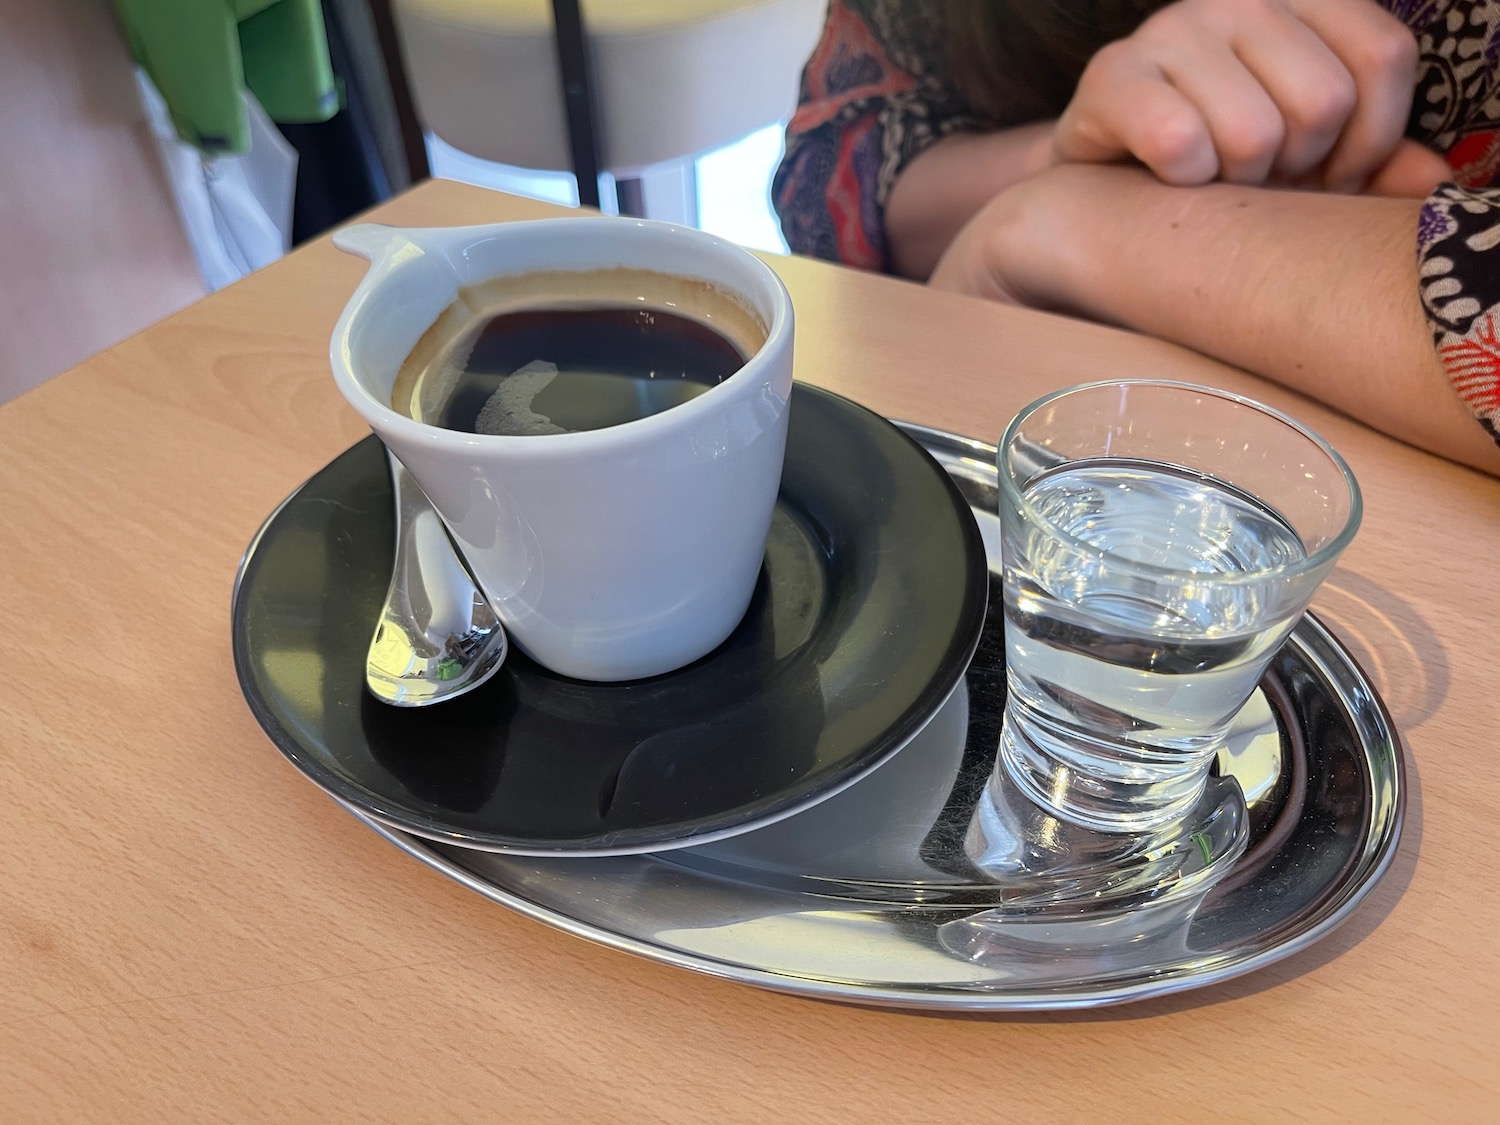 a cup of coffee and a glass of water on a tray